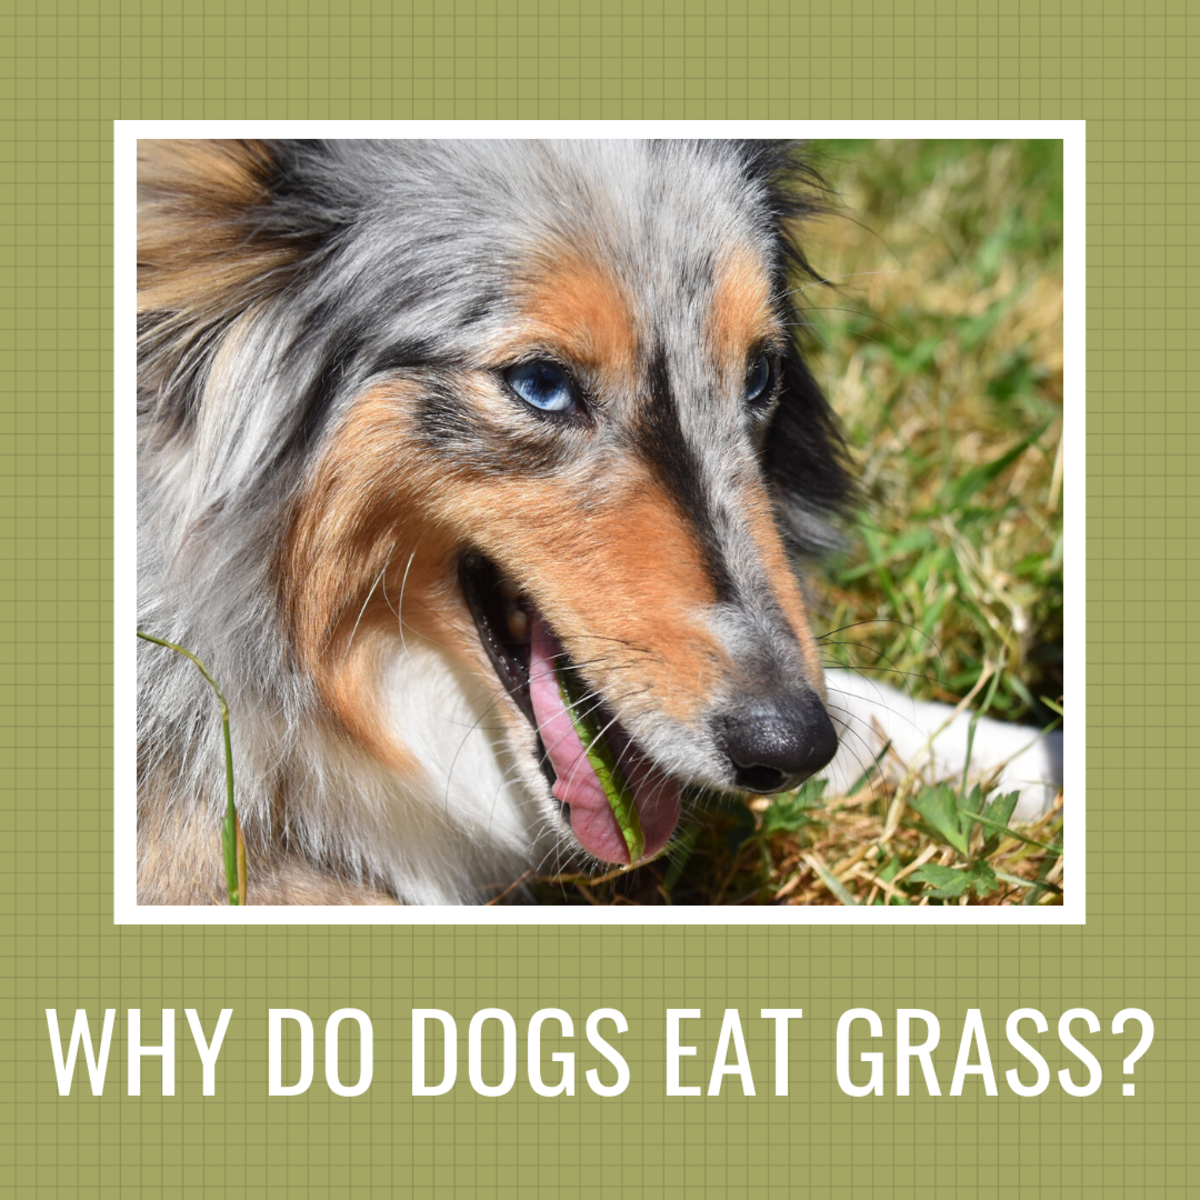 Why Is My Dog Eating Grass Frantically?